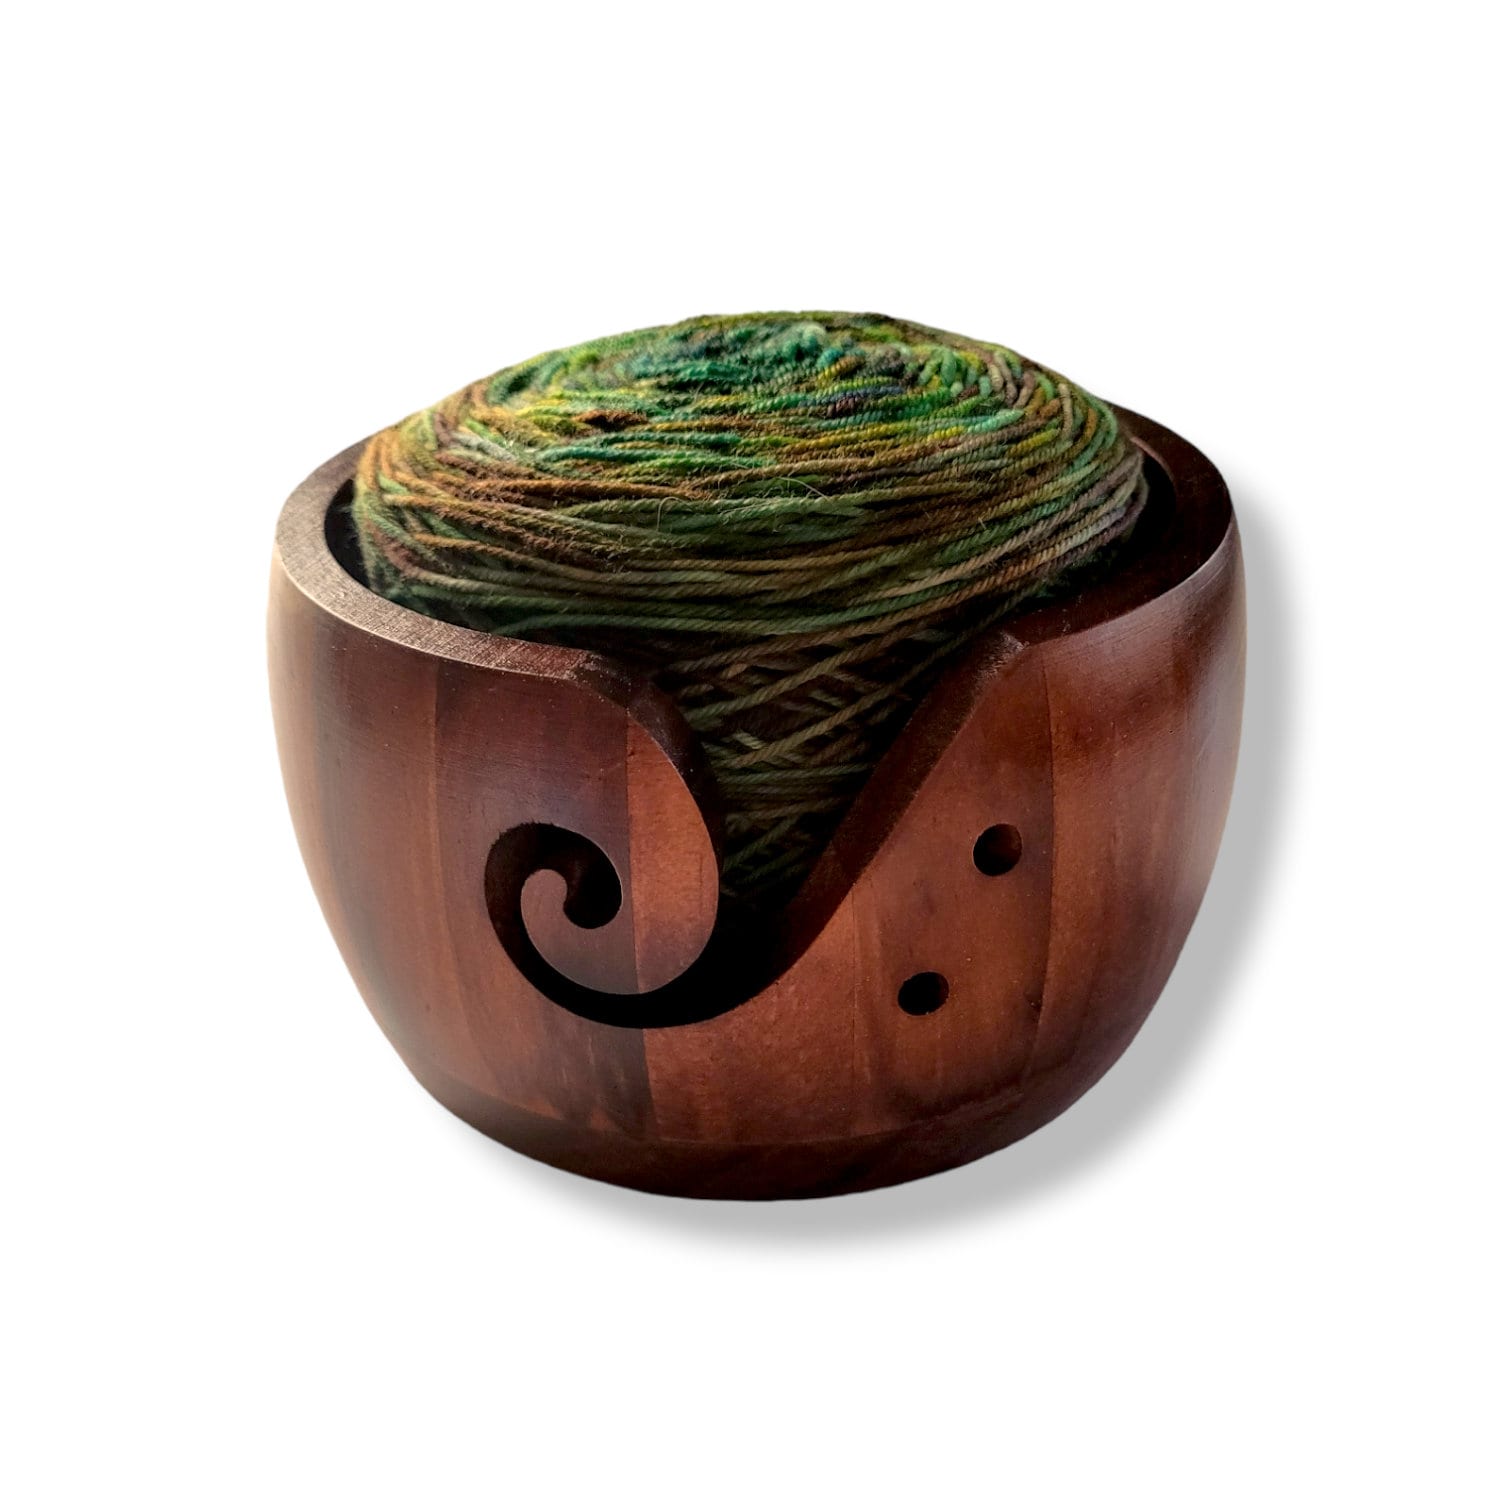 Wooden Yarn Bowls: 3 styles/colors to choose from